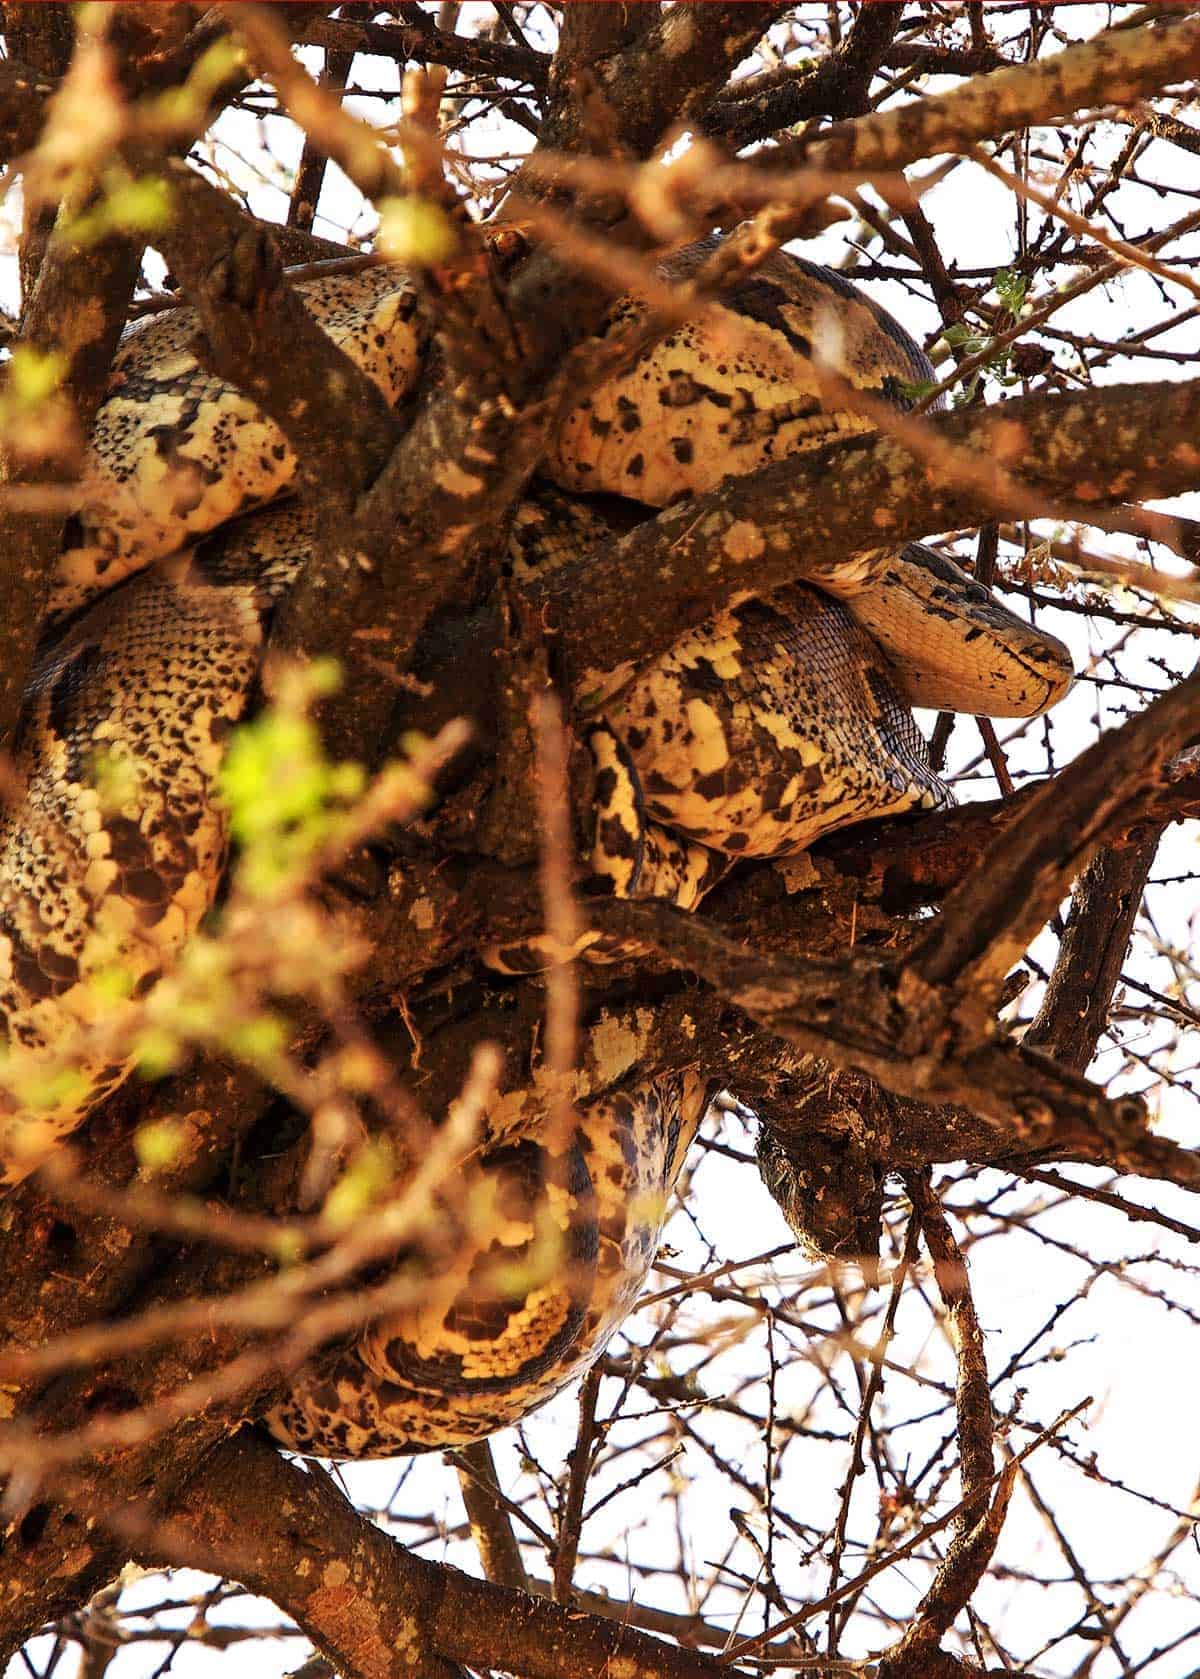 African Rock Python in a tree